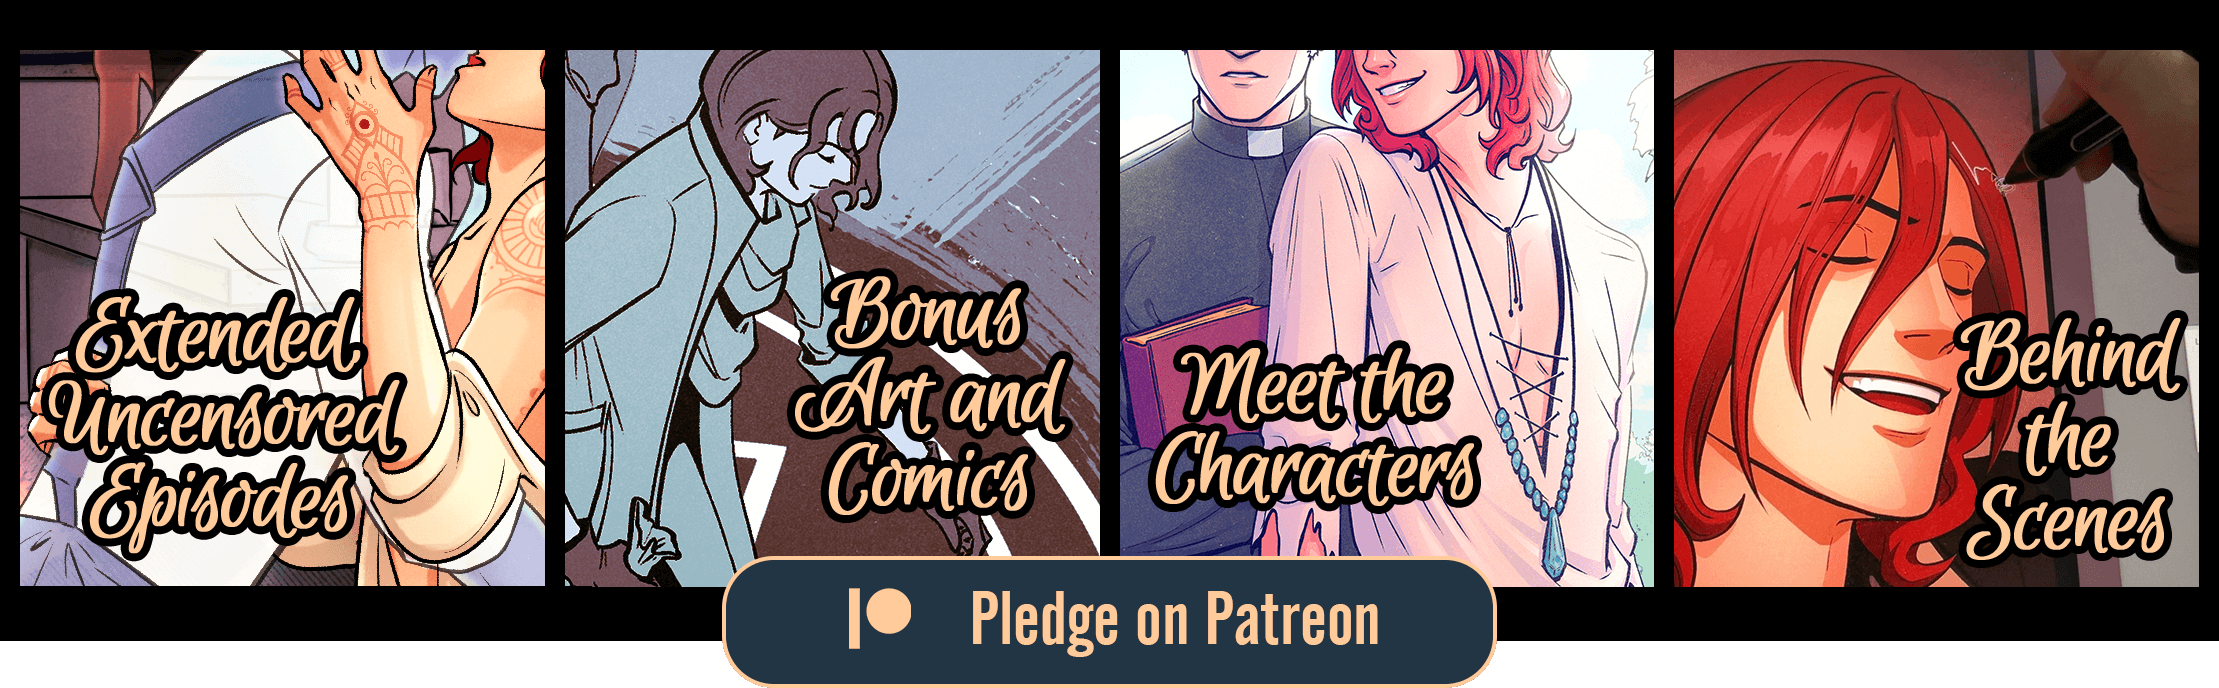 Sample art from my Patreon! Extended, uncensored episodes. Bonus art and comics. Meet the characters. Behind the scenes. Click to pledge on Patreon.